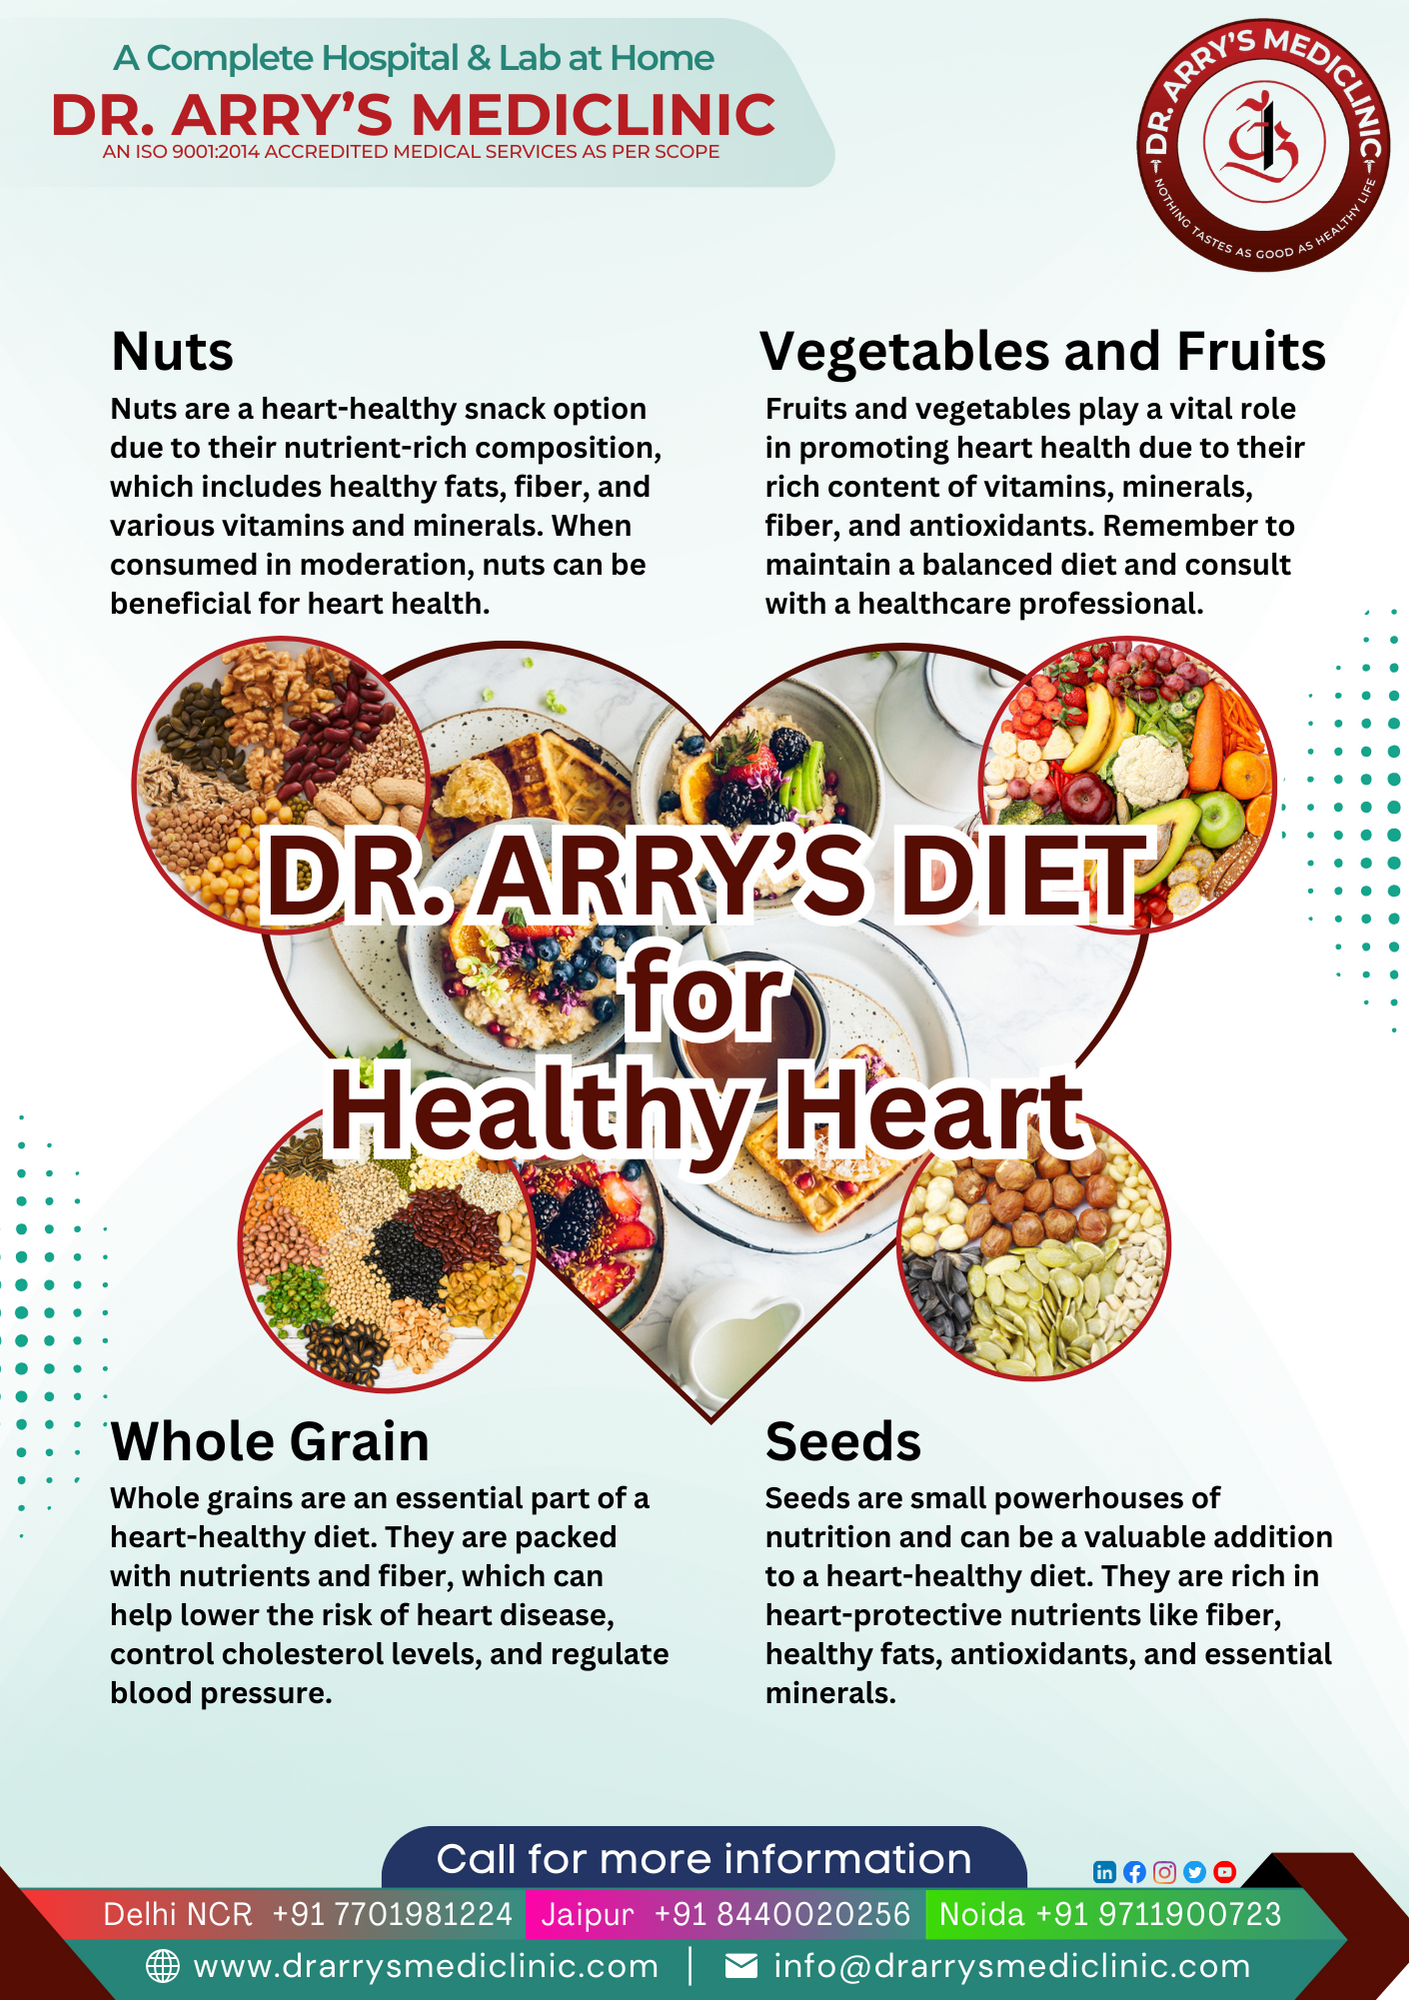 Dr. Arry's Diet for Healthy Heart